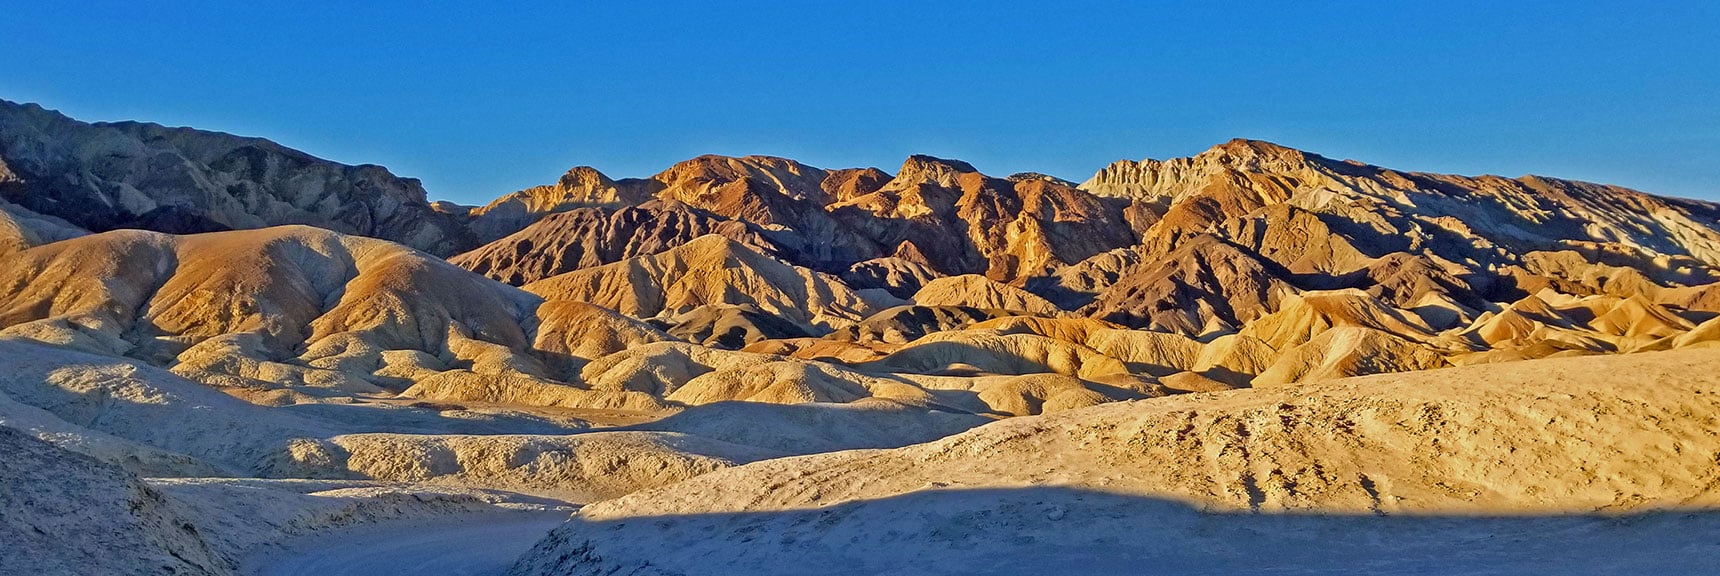 Colorful Hills to the West of the Canyon | Twenty Mule Team Canyon | Death Valley National Park, California